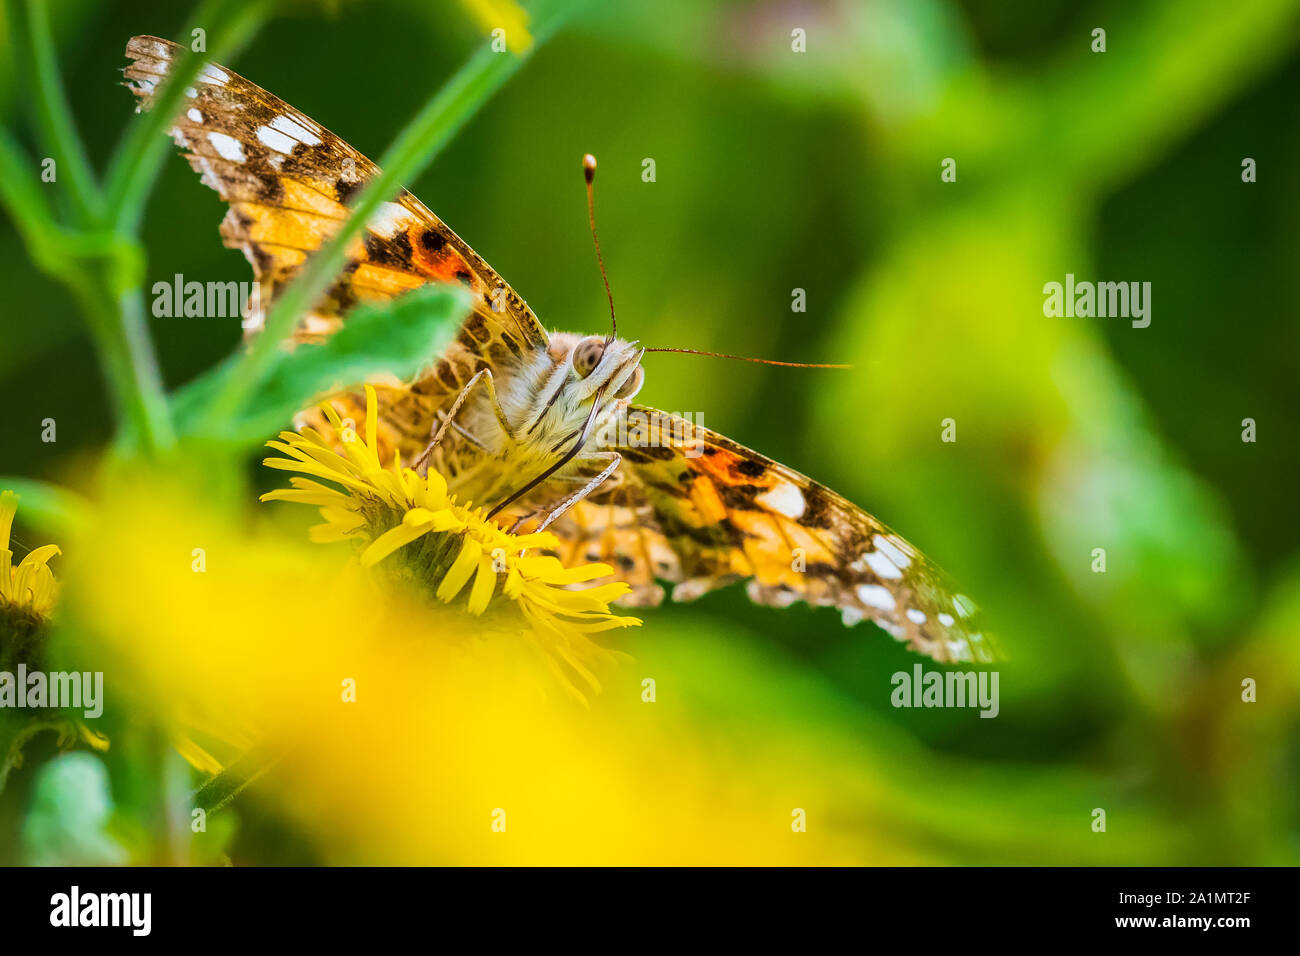 Frontal view of a Painted Lady butterfly vanessa cardu feeding nectar on yellow flowers Stock Photo